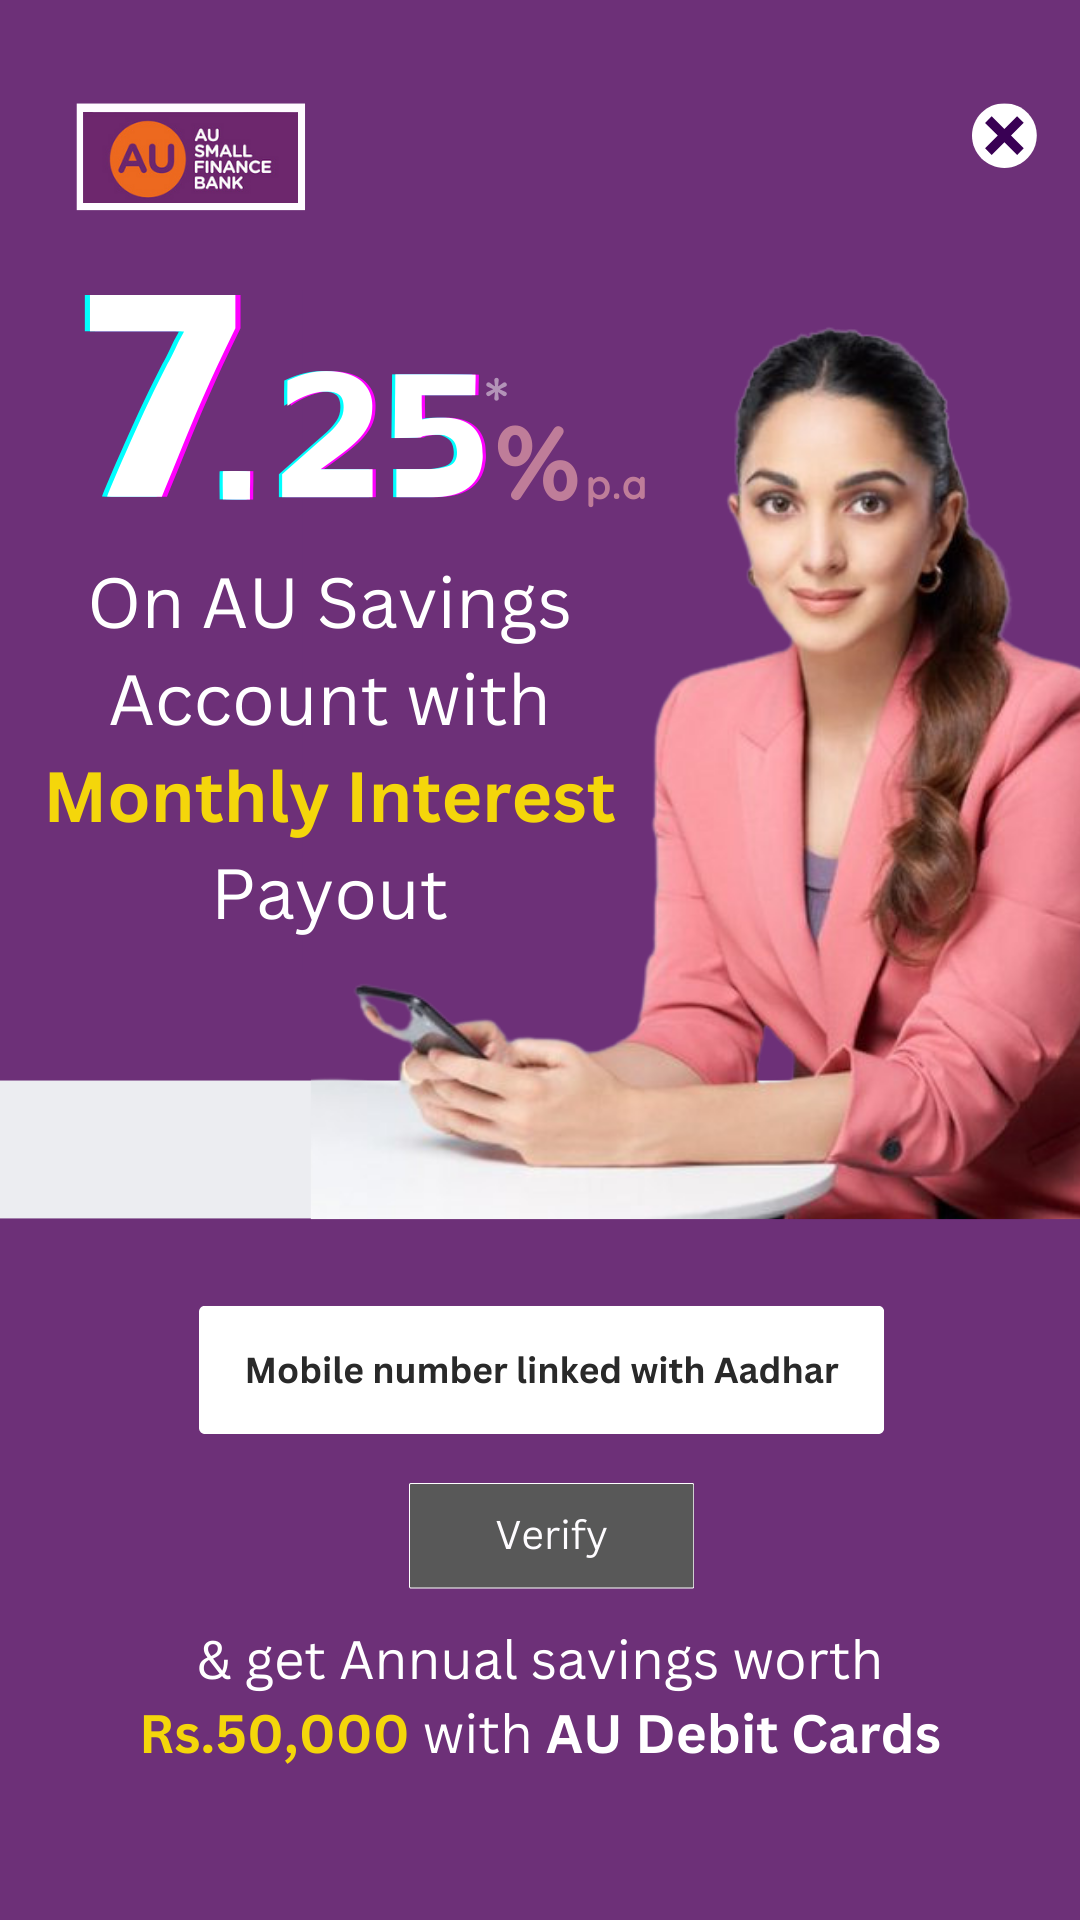 AU bank form popup for mobile